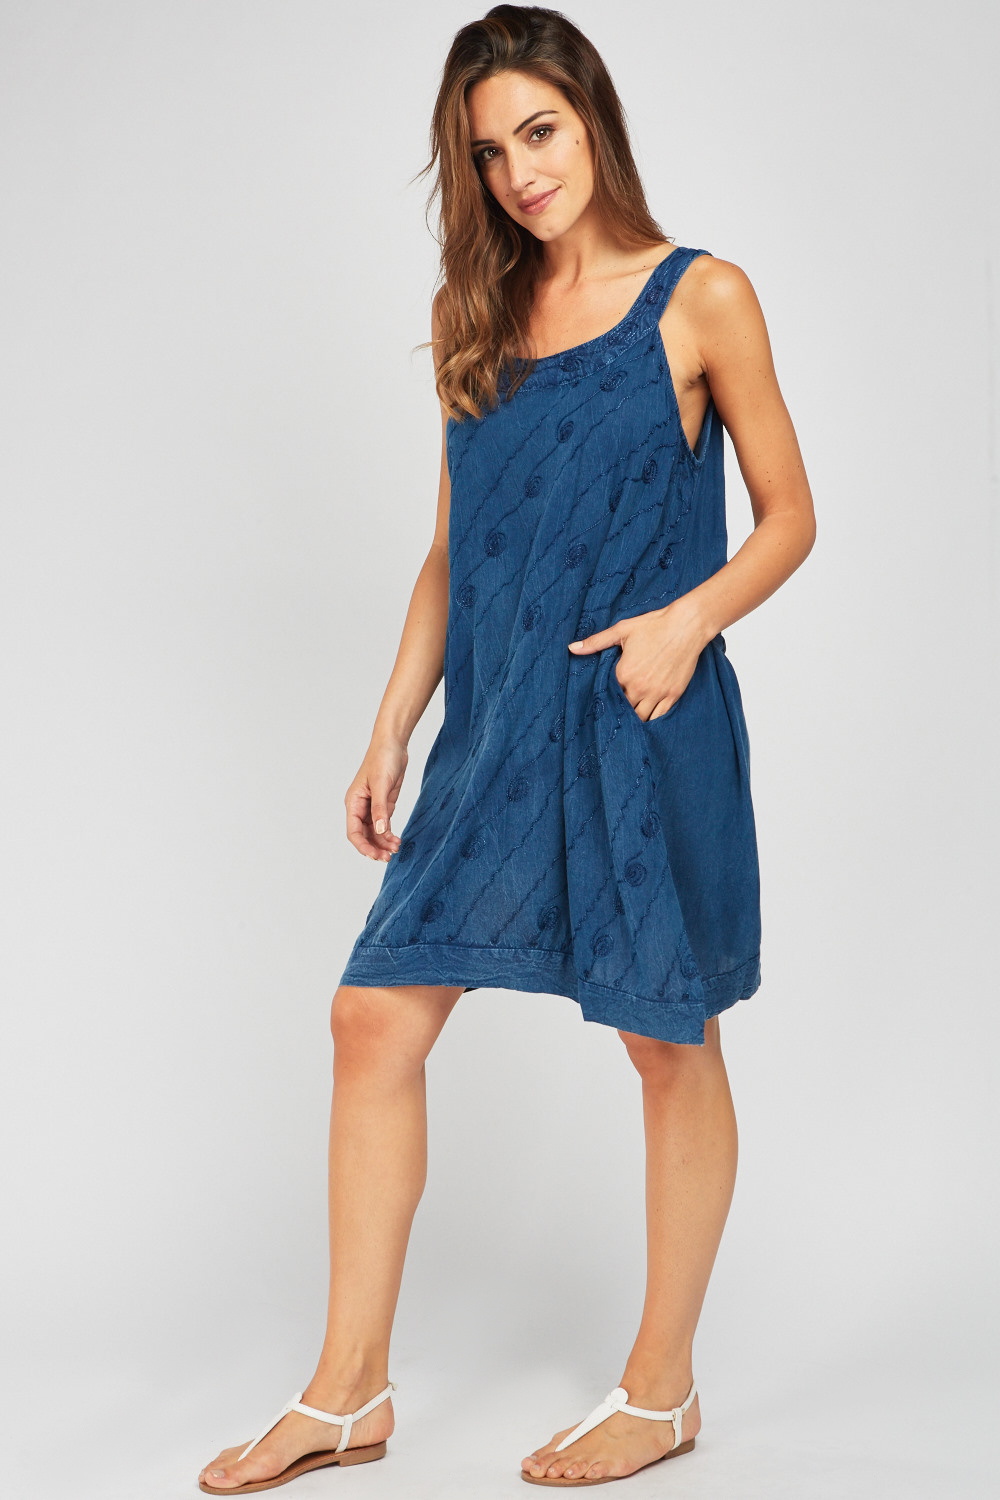 Loop Stitched Faded Tent Dress - Just $6